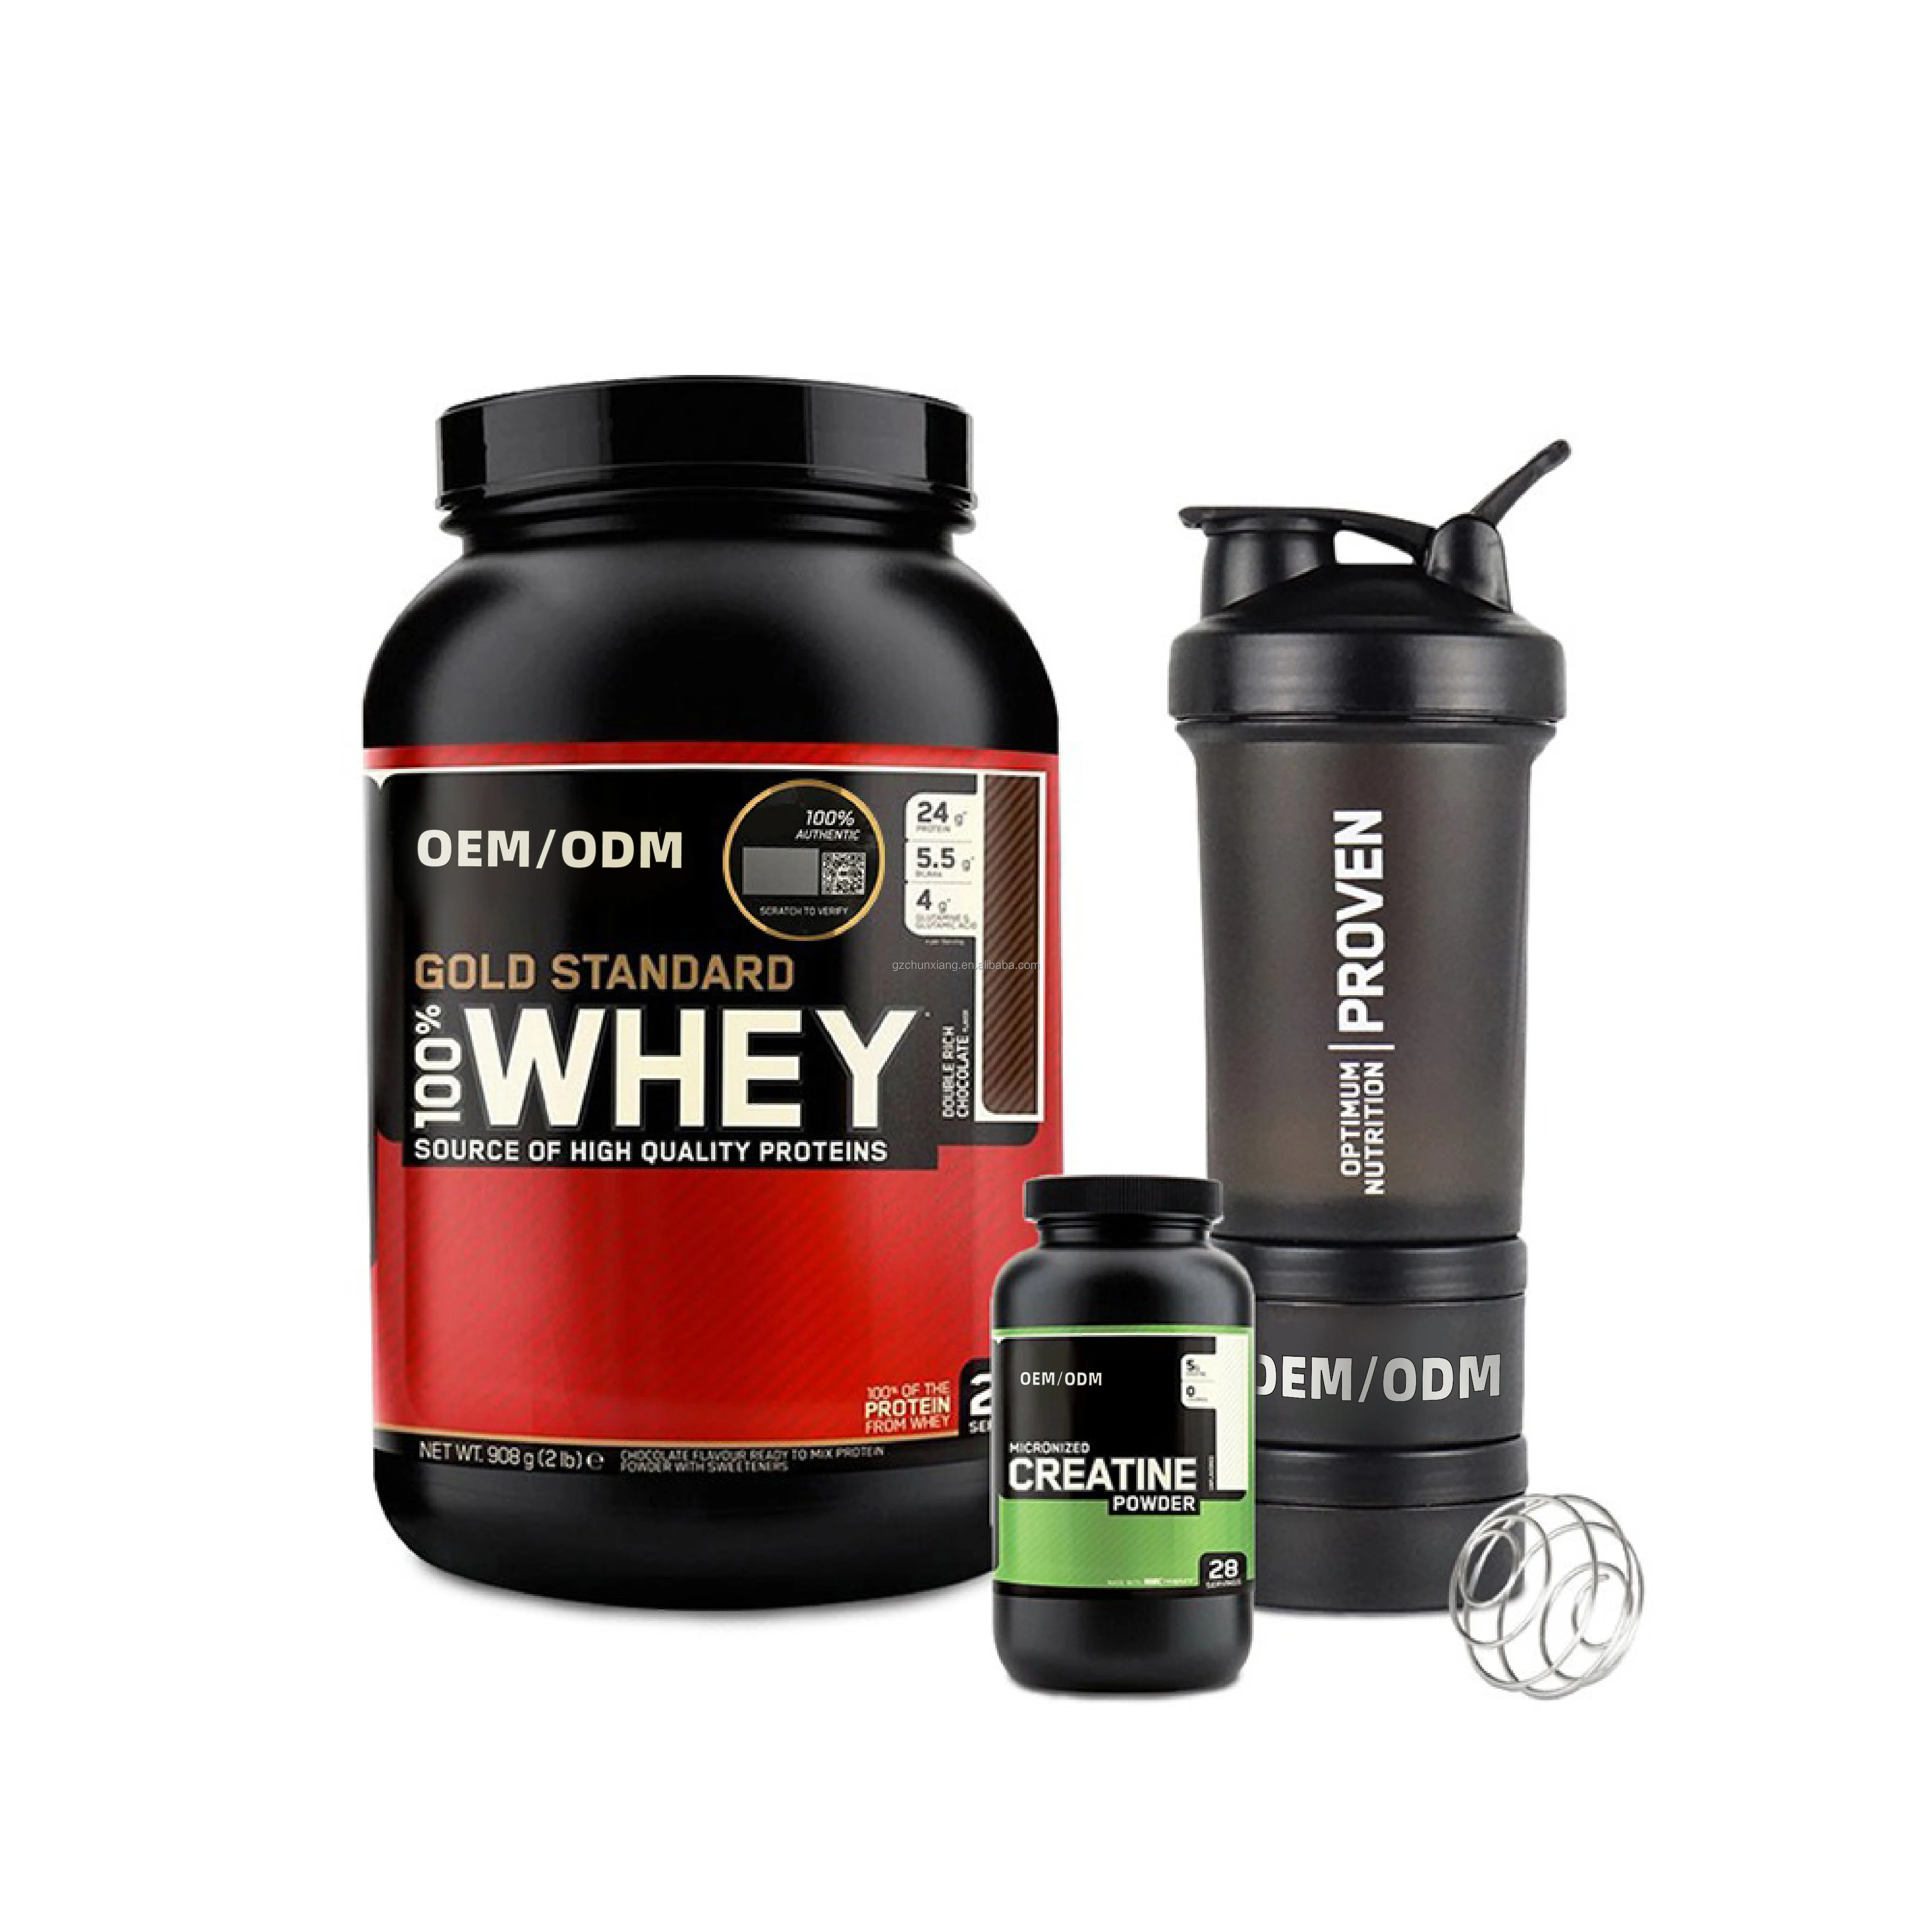 
Gold standard organic food grade whey protein soy protein isolate powder drink with free shaker bottle 